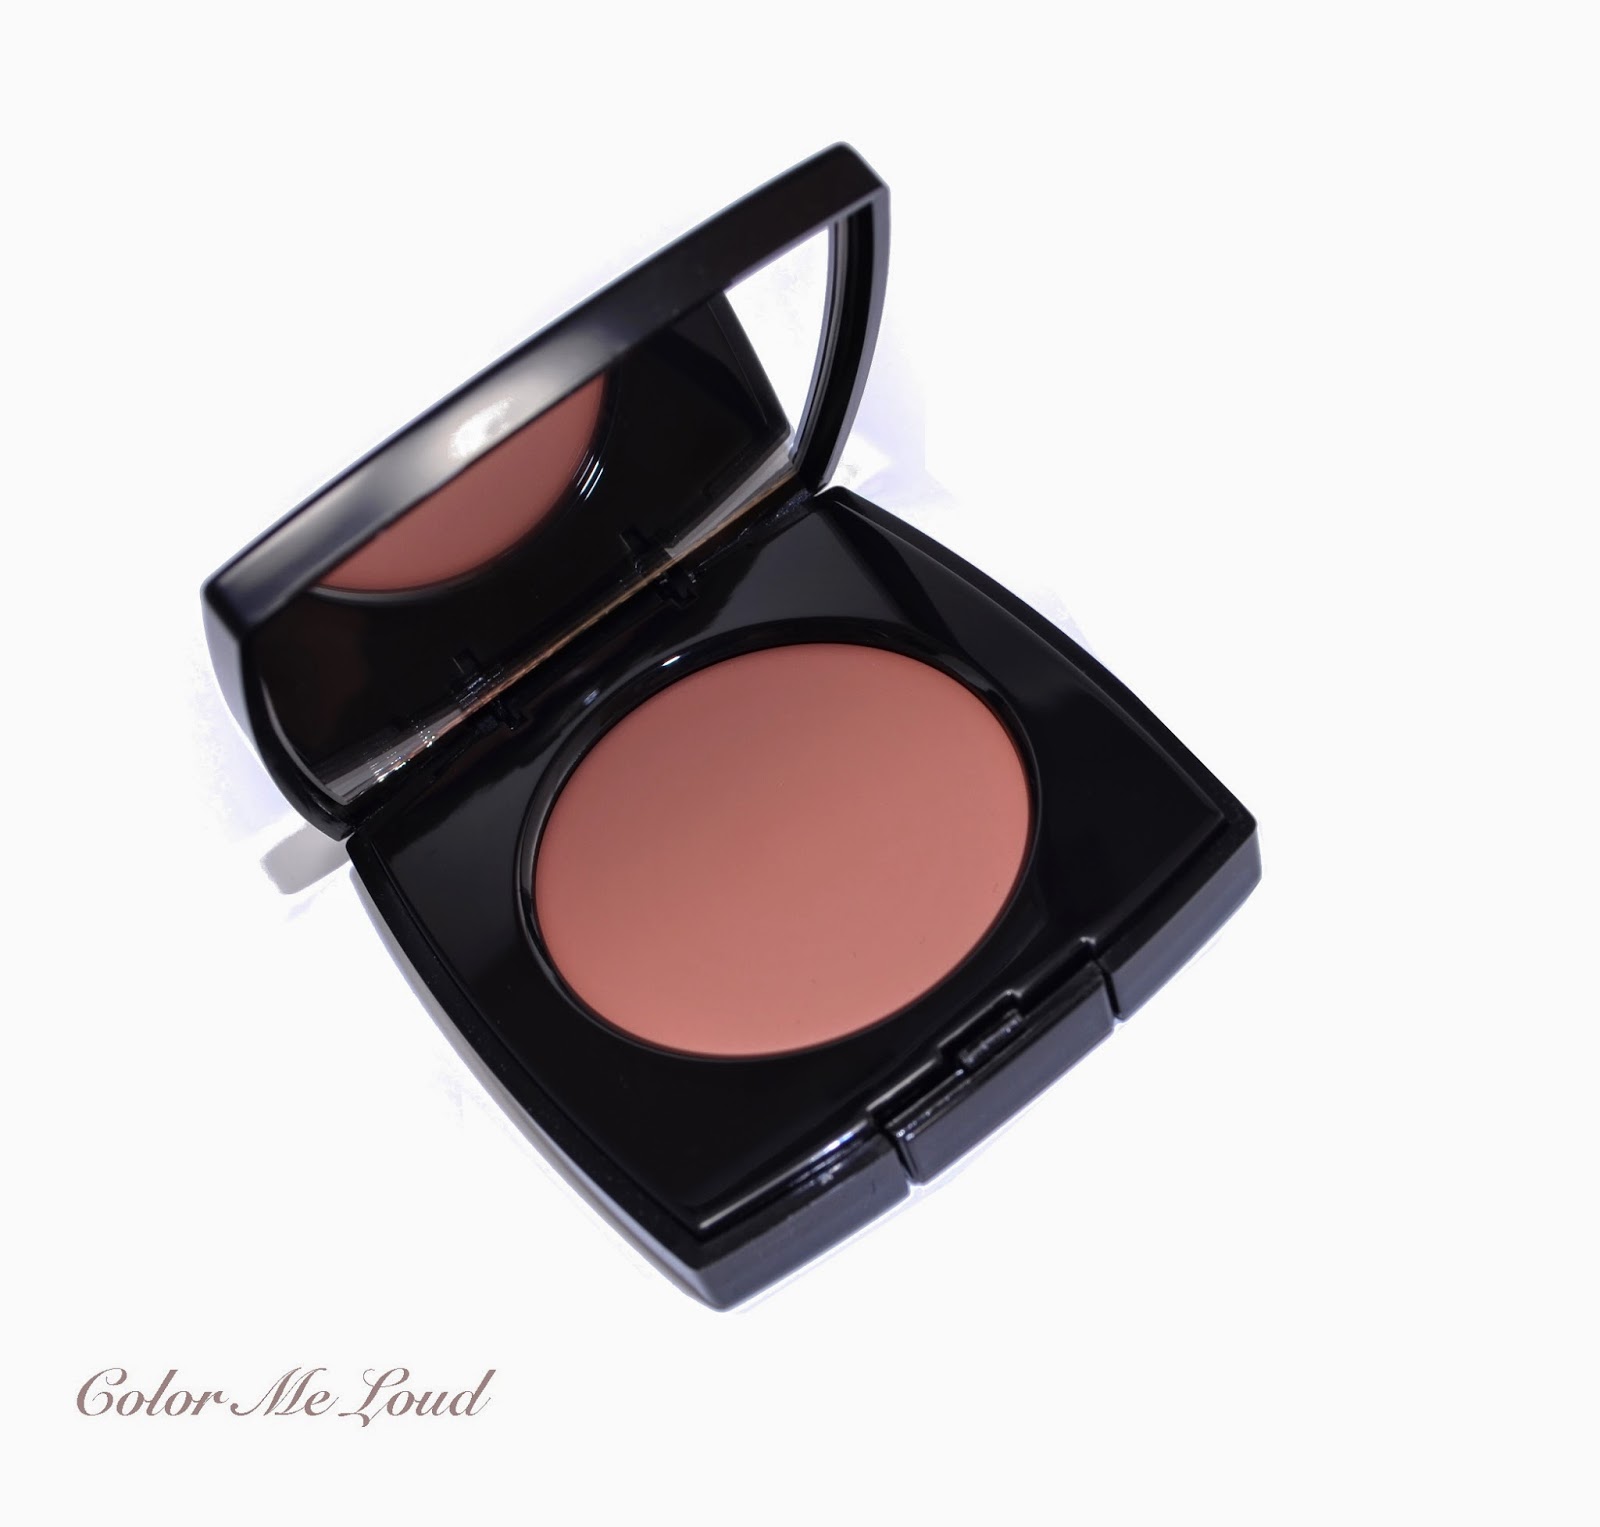 Chanel Le Blush Creme #71 Cheeky from Reflets D'Été Collection for Summer 2014, Review, Swatch, Comparison & FOTD